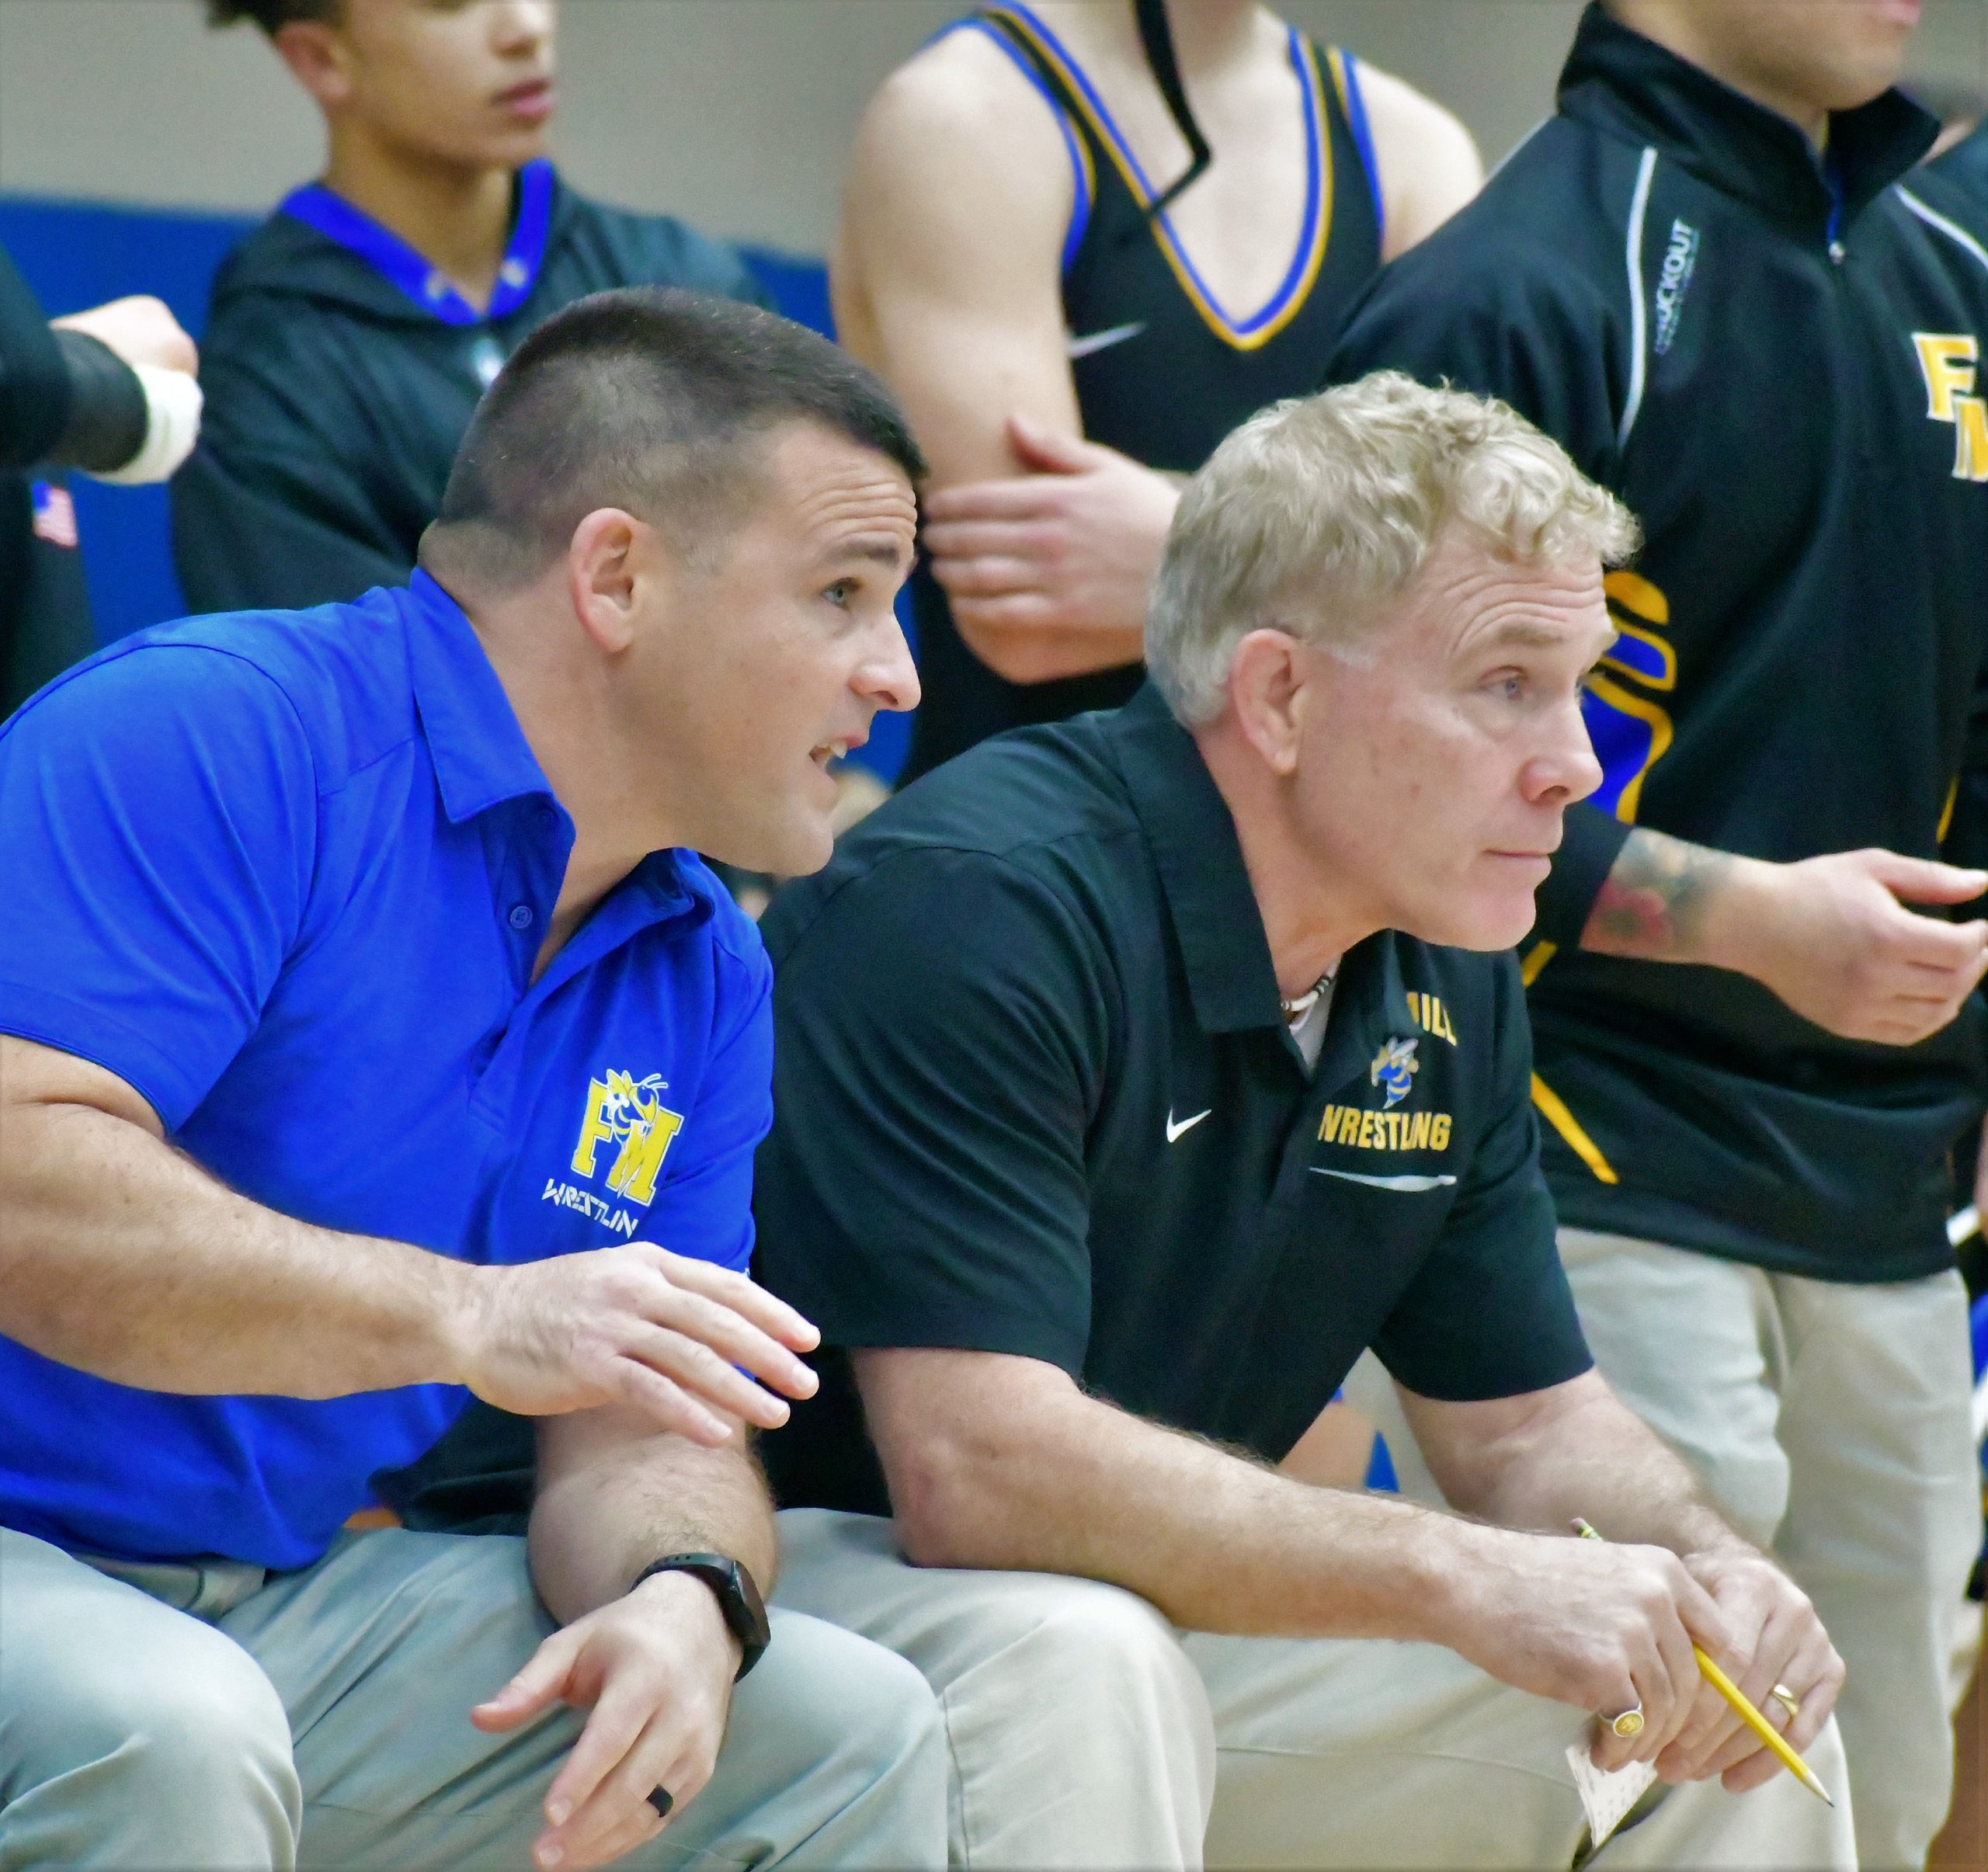 Marullo named new Fort Mill wrestling coach